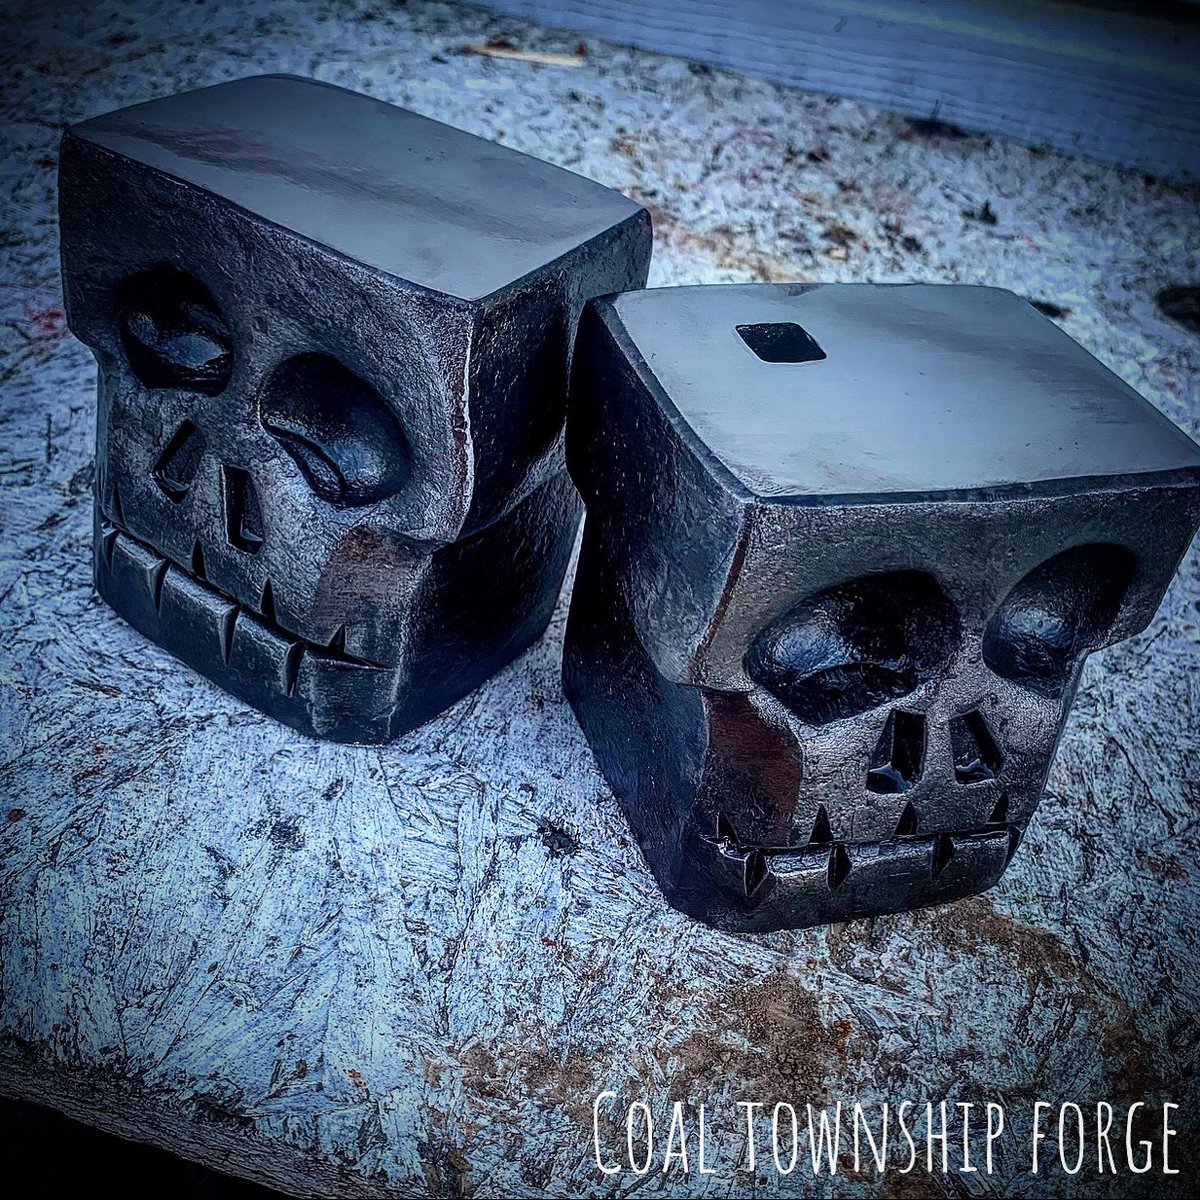 Handforged Mini Anvil “ London Pattern” (Made to Order)